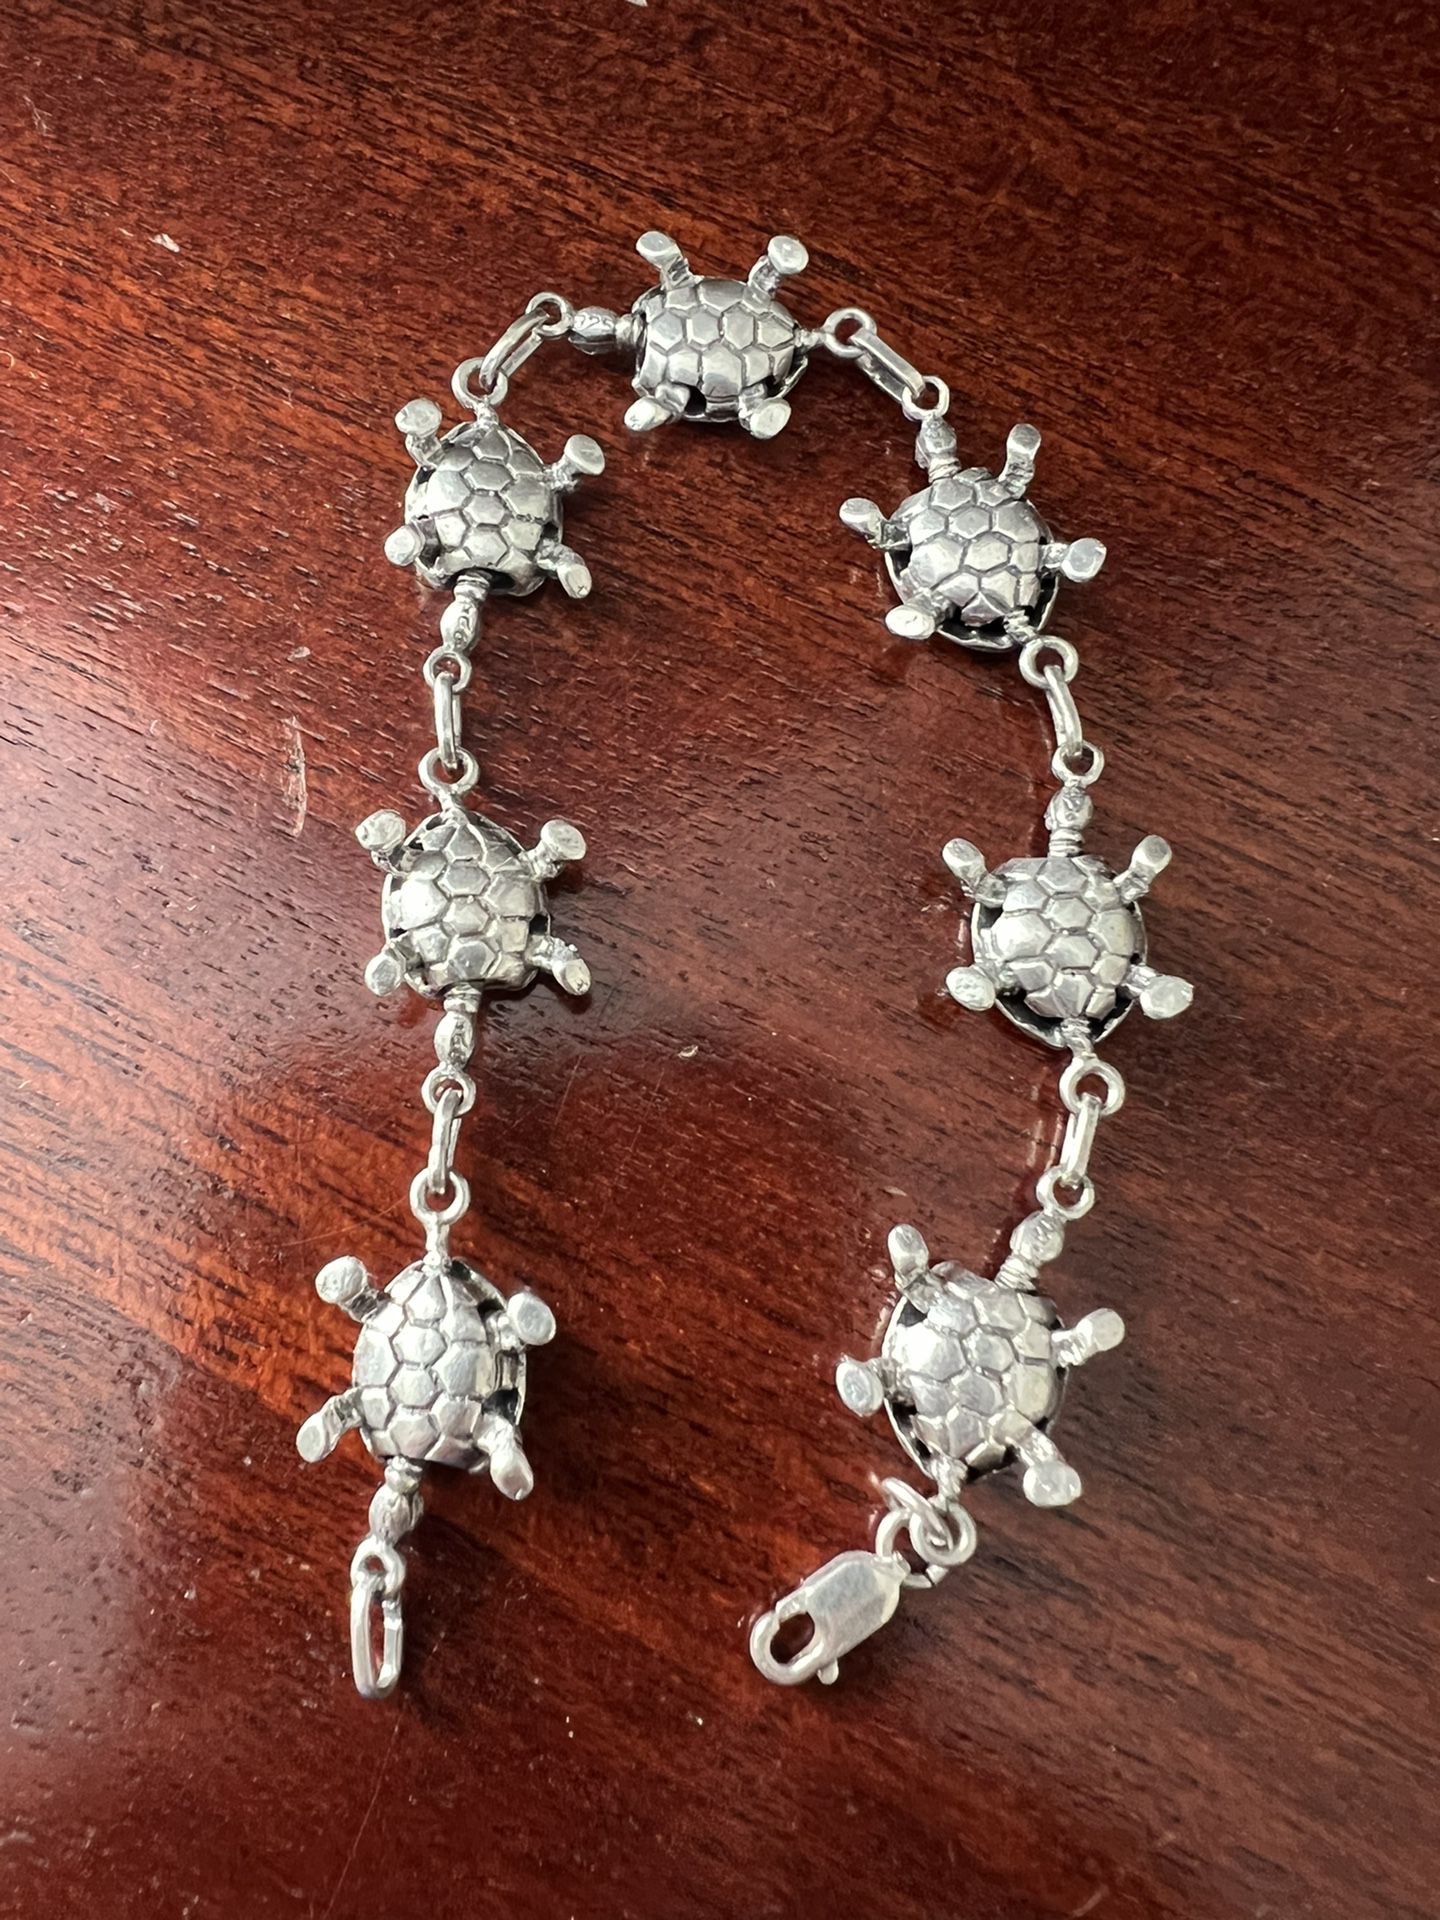 PURE STERLING SILVER 925 BRACELET EVERY SINGLE TURTLE ARE MARKWITH 925 SILVERS SIZE 7.5 IS VERY HEAVY.